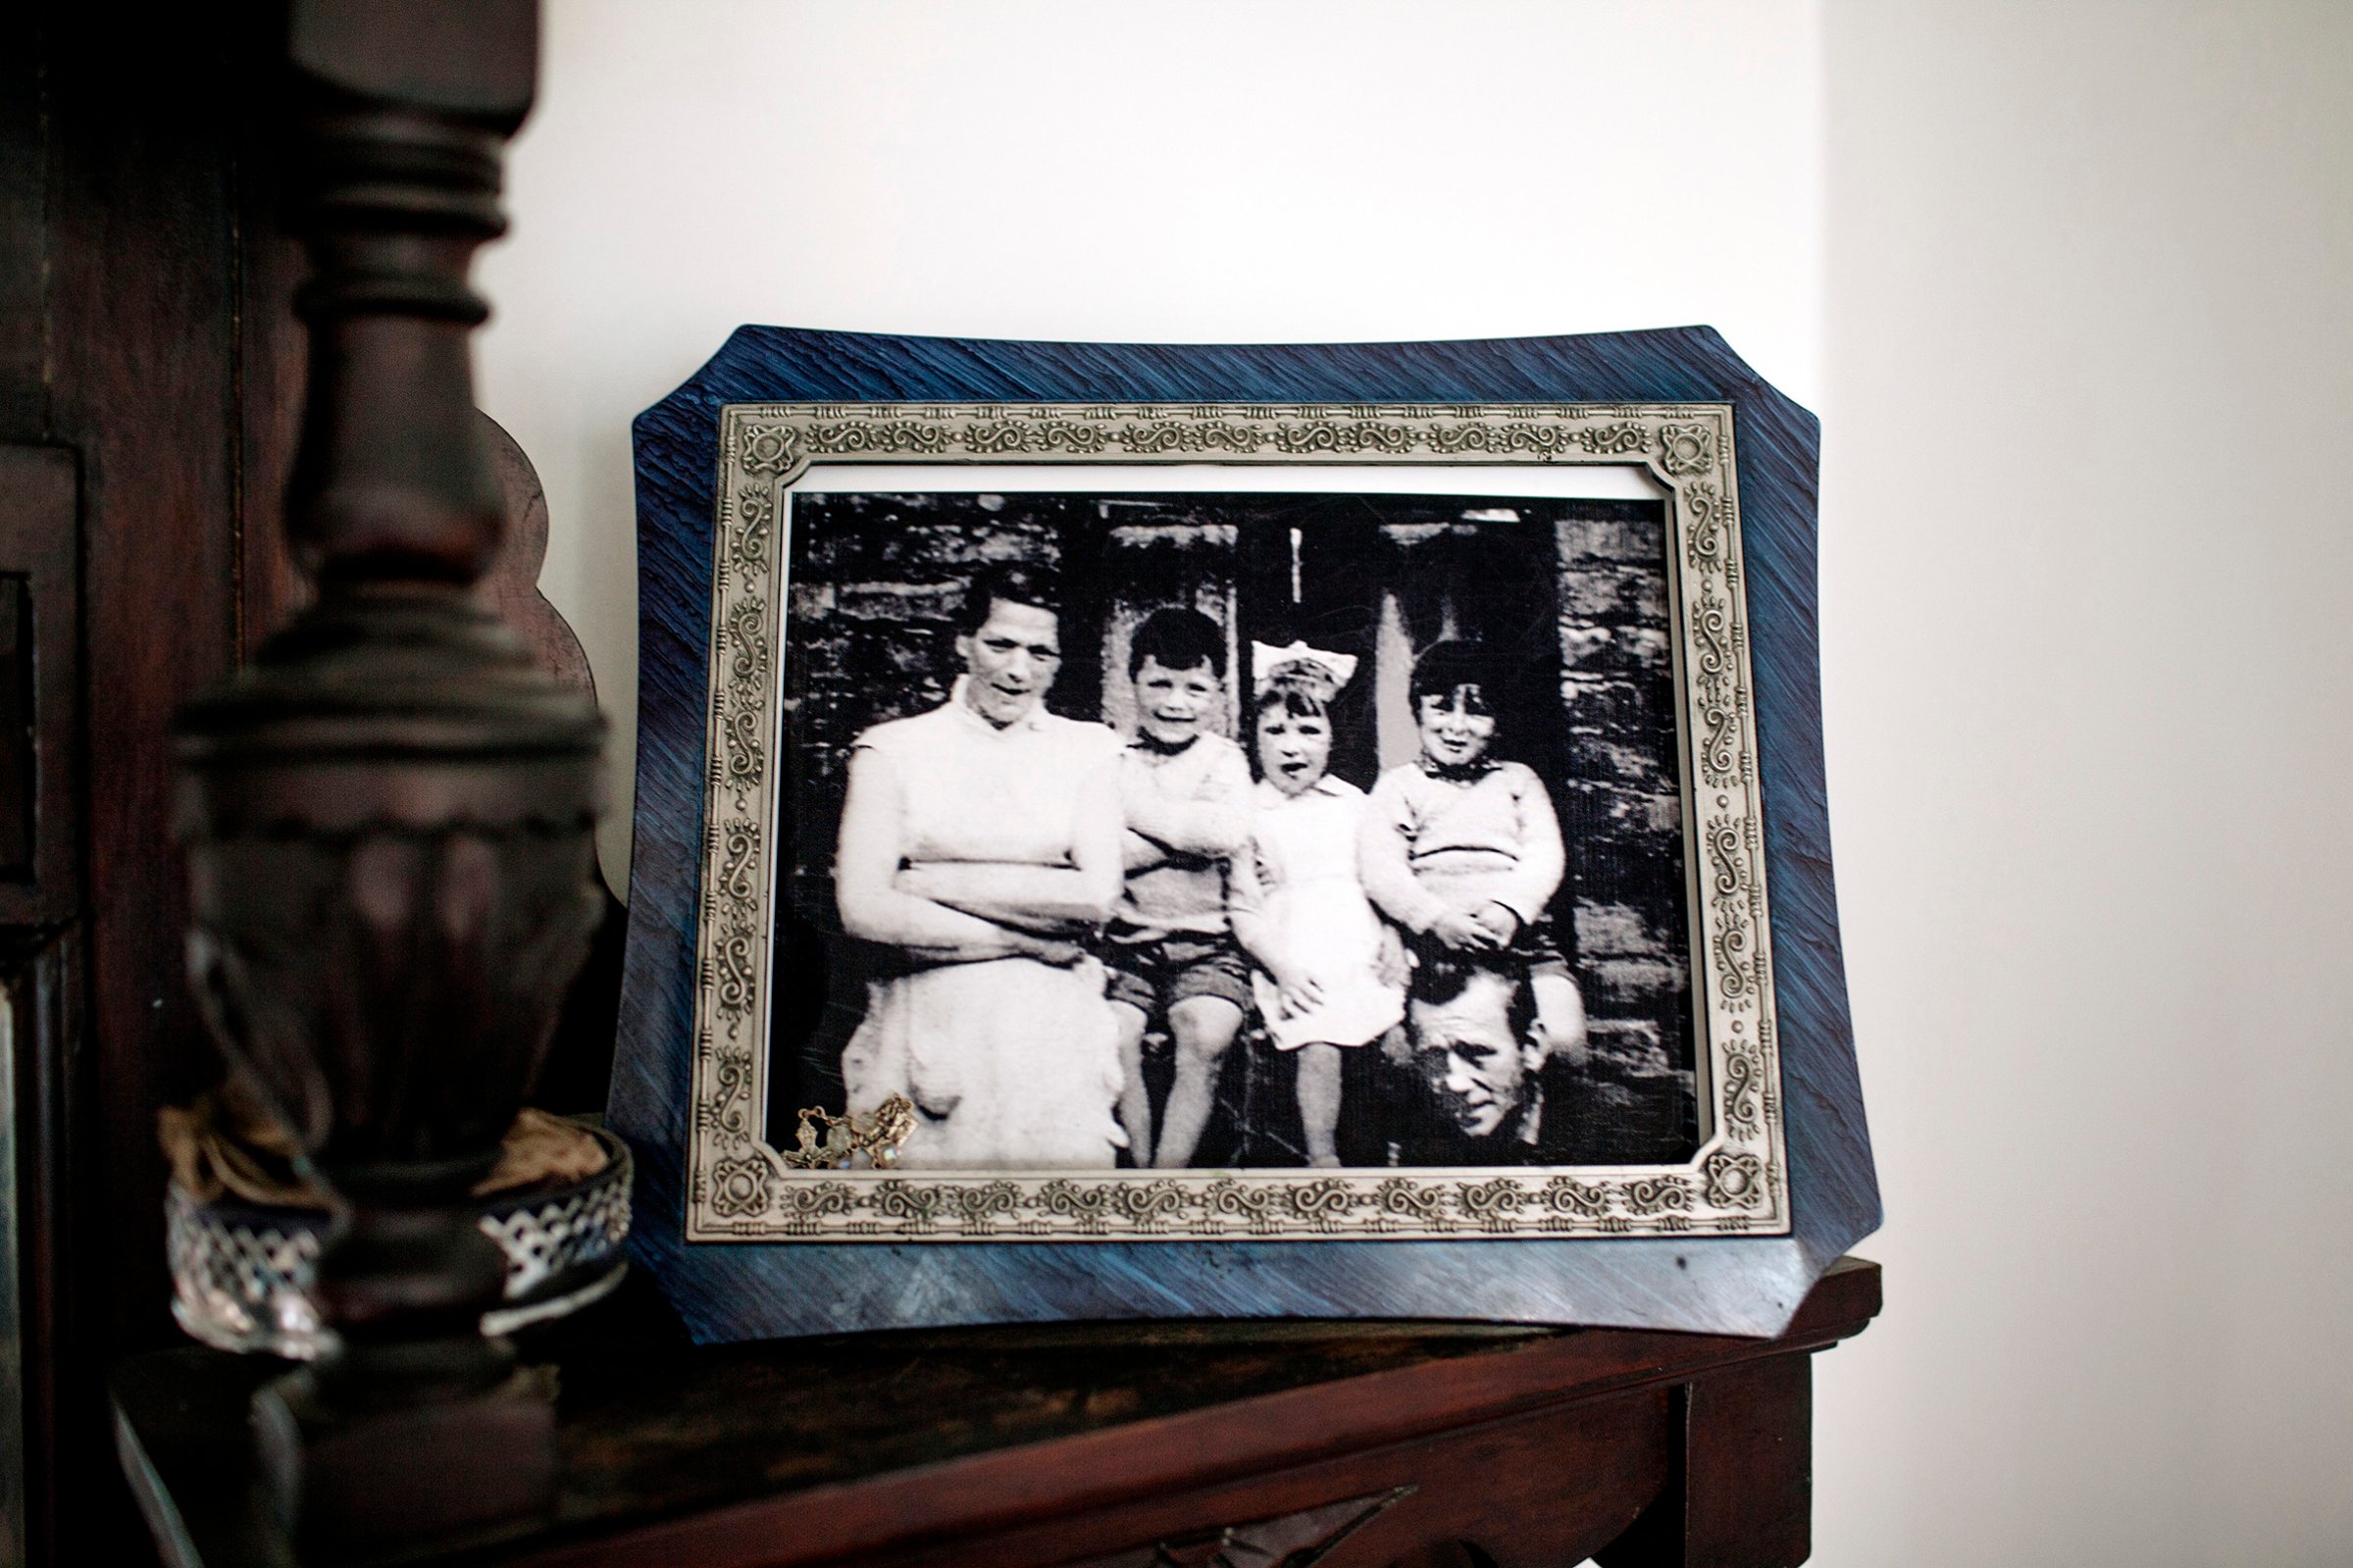 A portrait of the McConville family in the home of Helen McKendry, daughter of Jean McConville (left), a widowed Belfast mother of 10 who was killed in 1972.